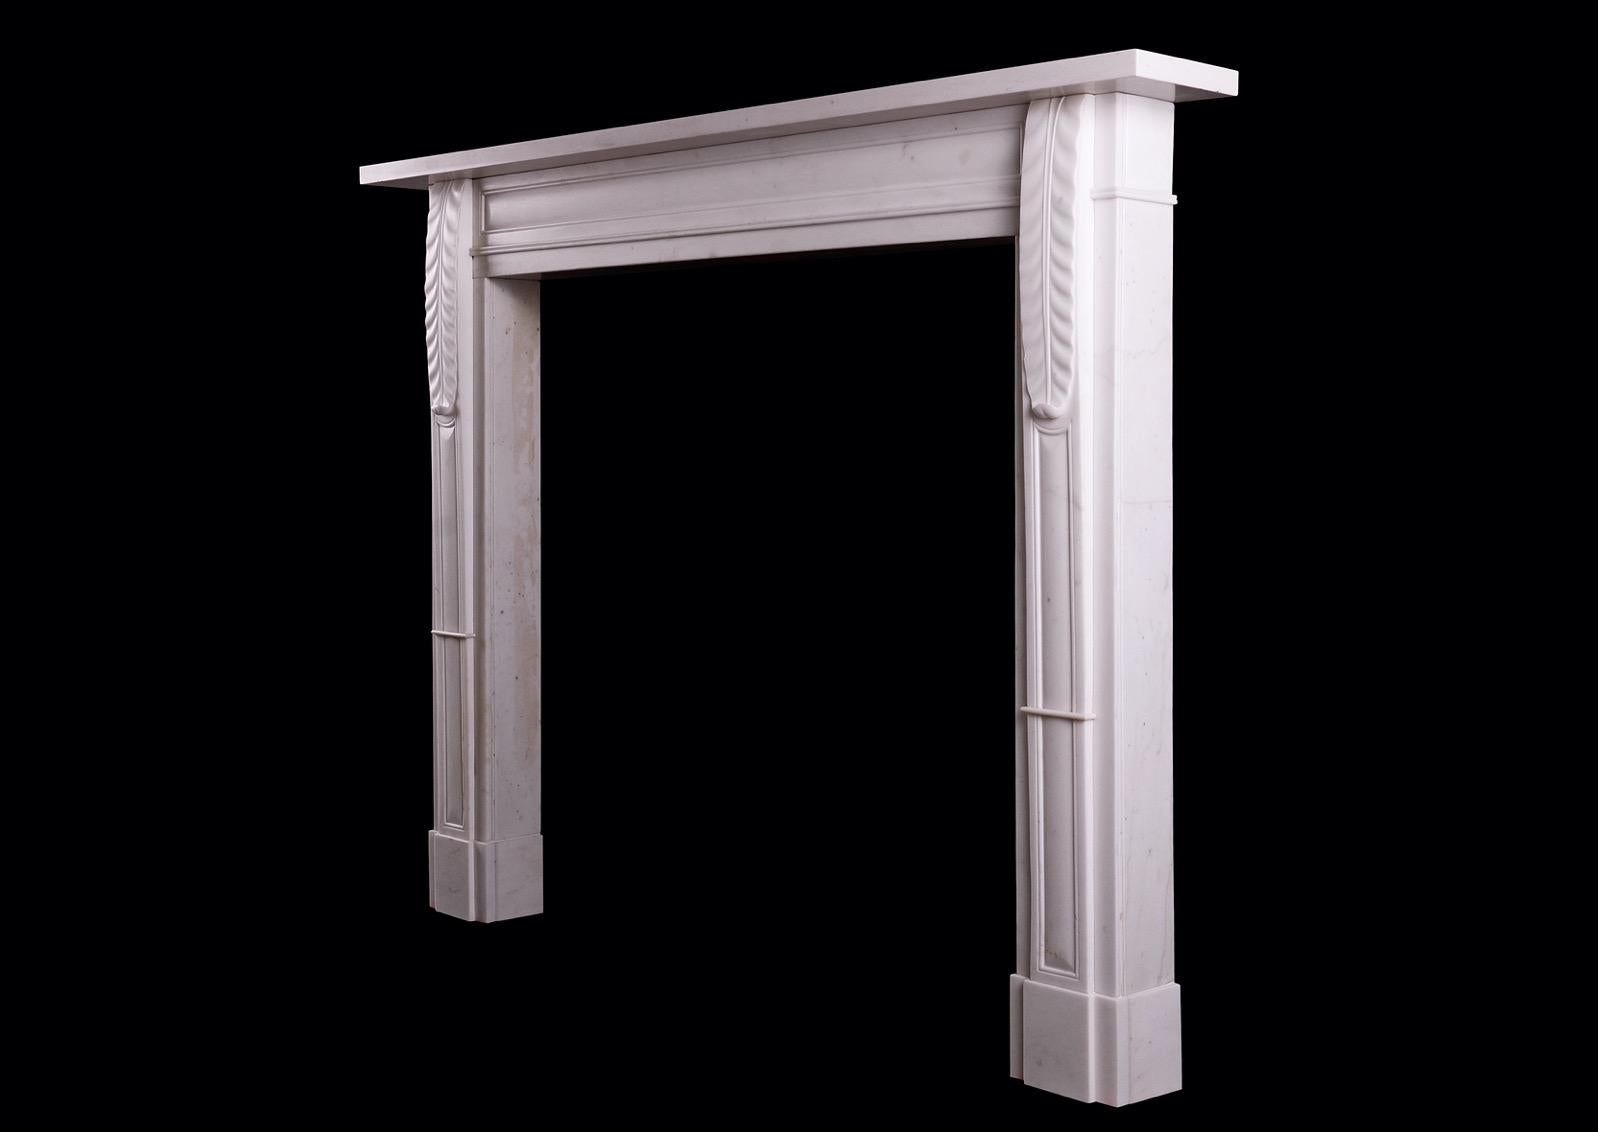 20th Century Understated English Regency Statuary Marble Fireplace For Sale